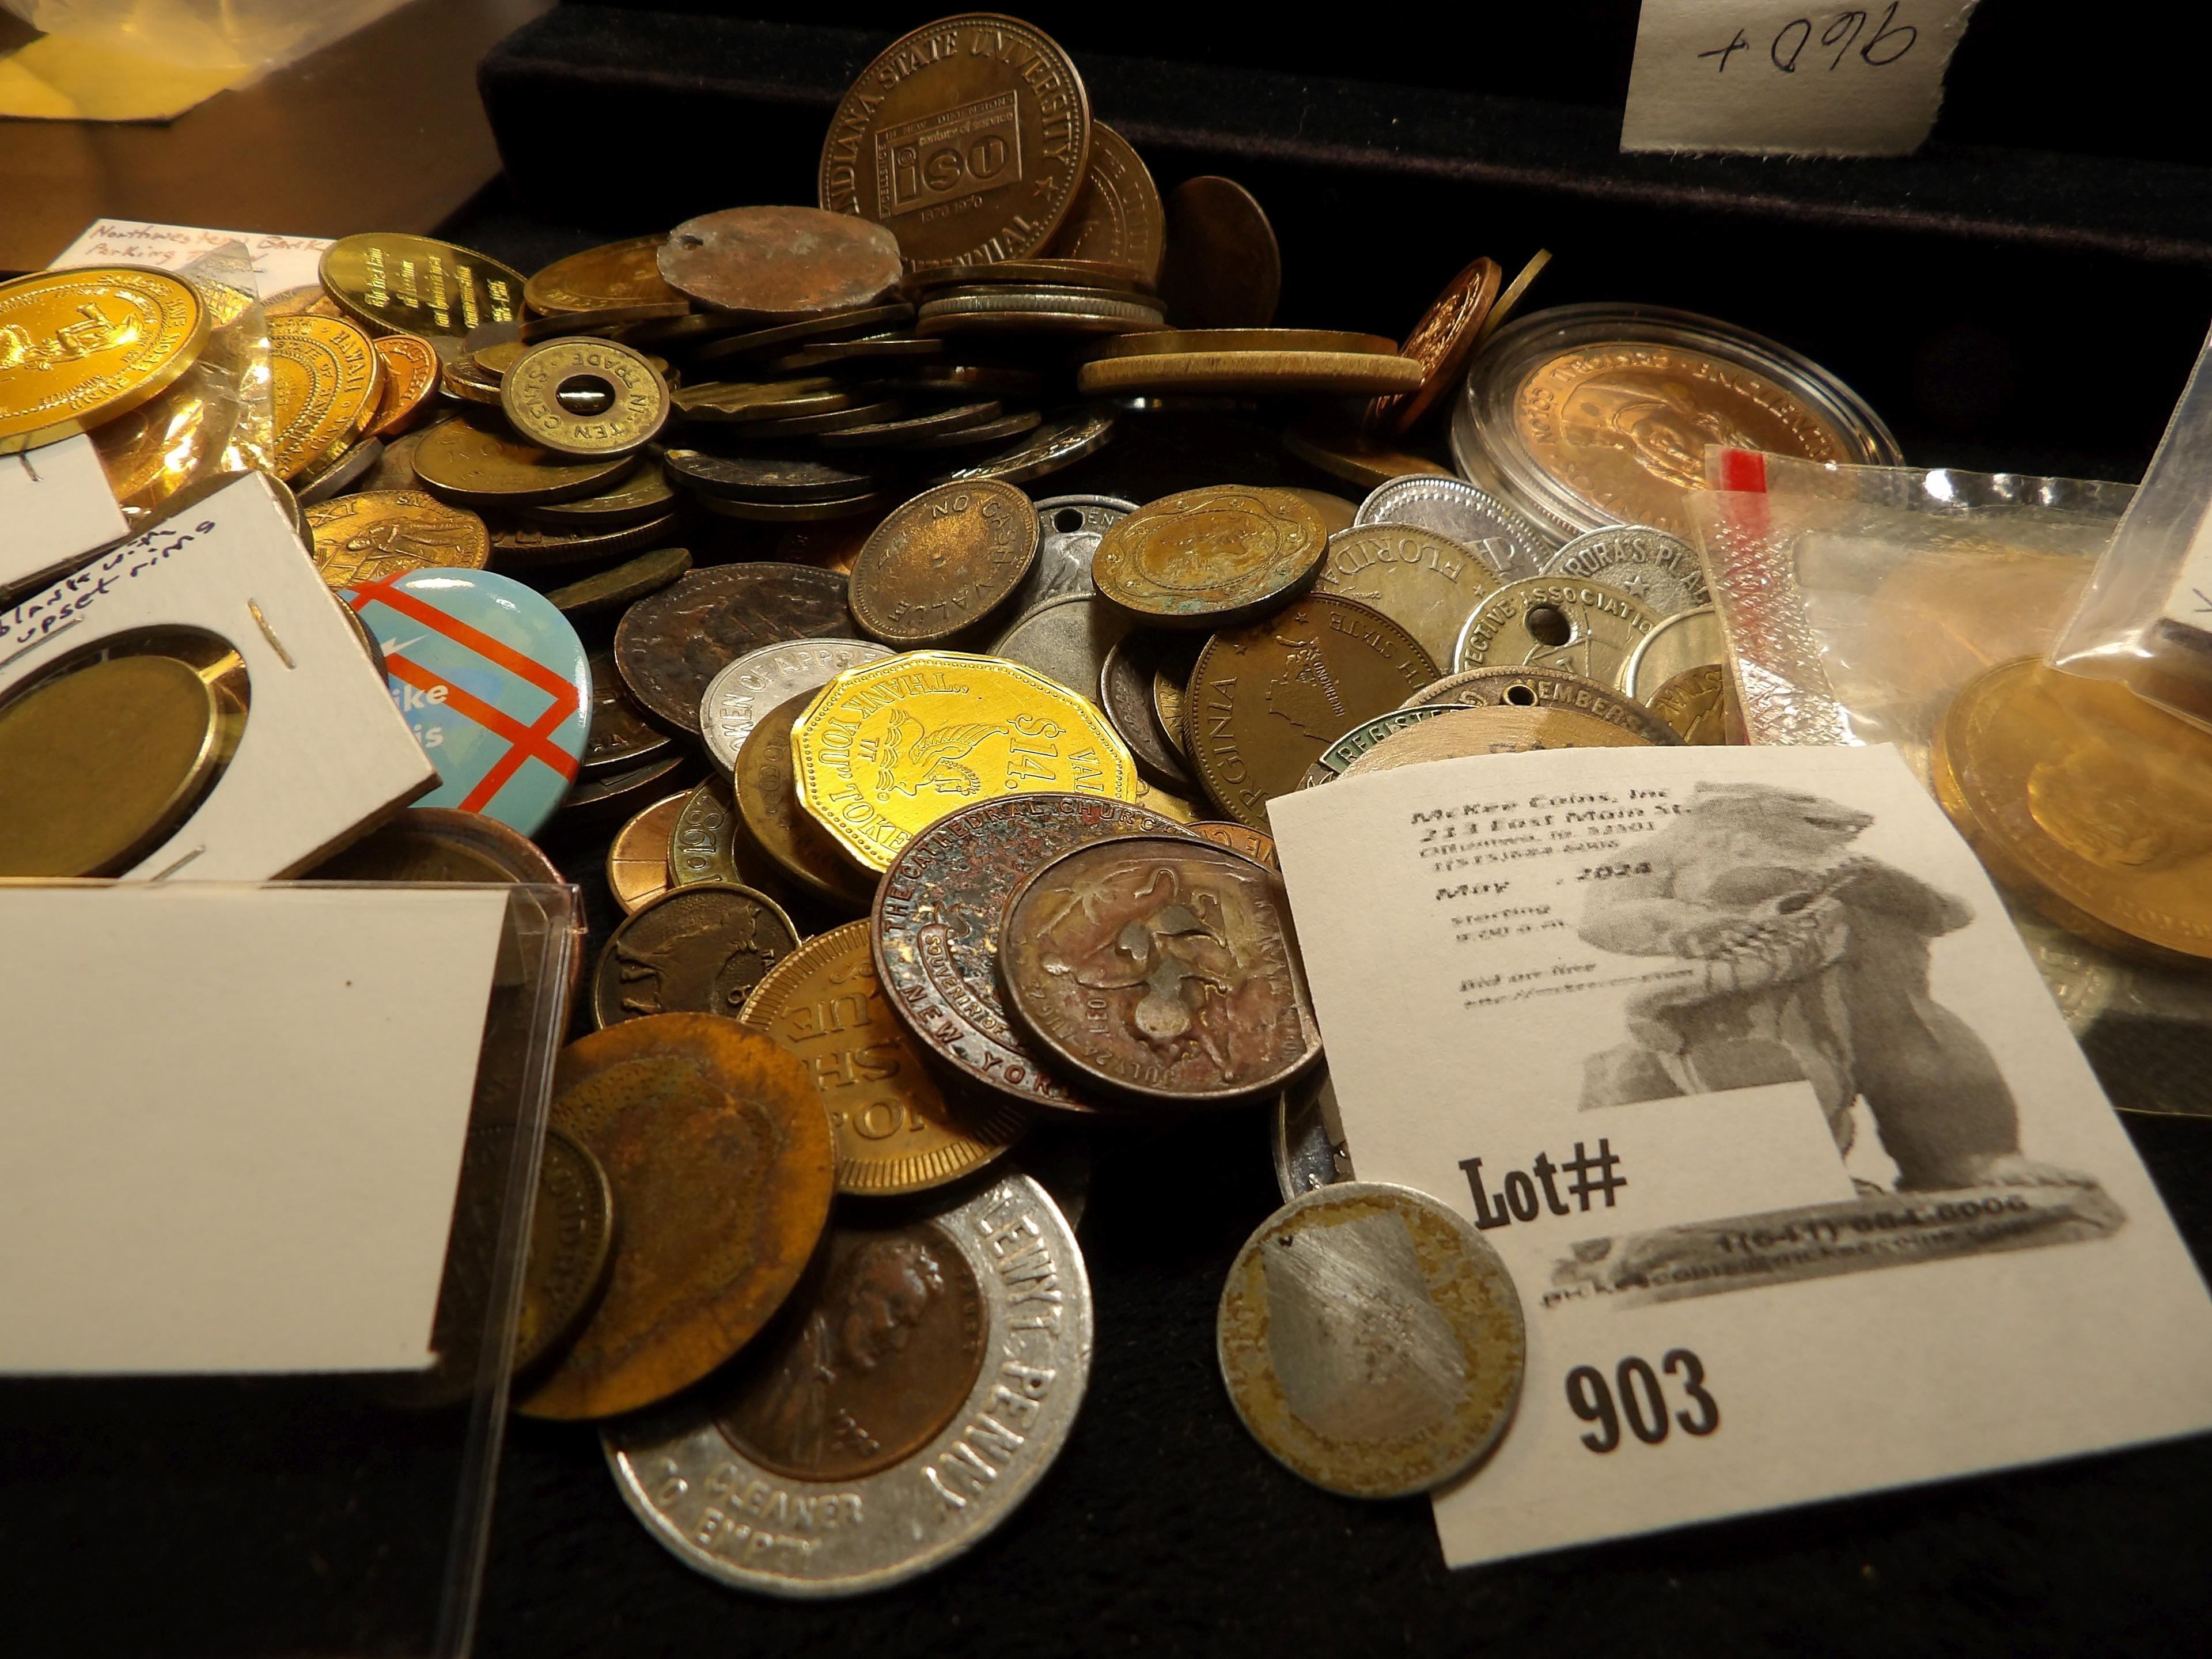 Lot of Medals, Tokens, & what ever including an 1850 U.S. Large Cent, total weight of this lot is ov